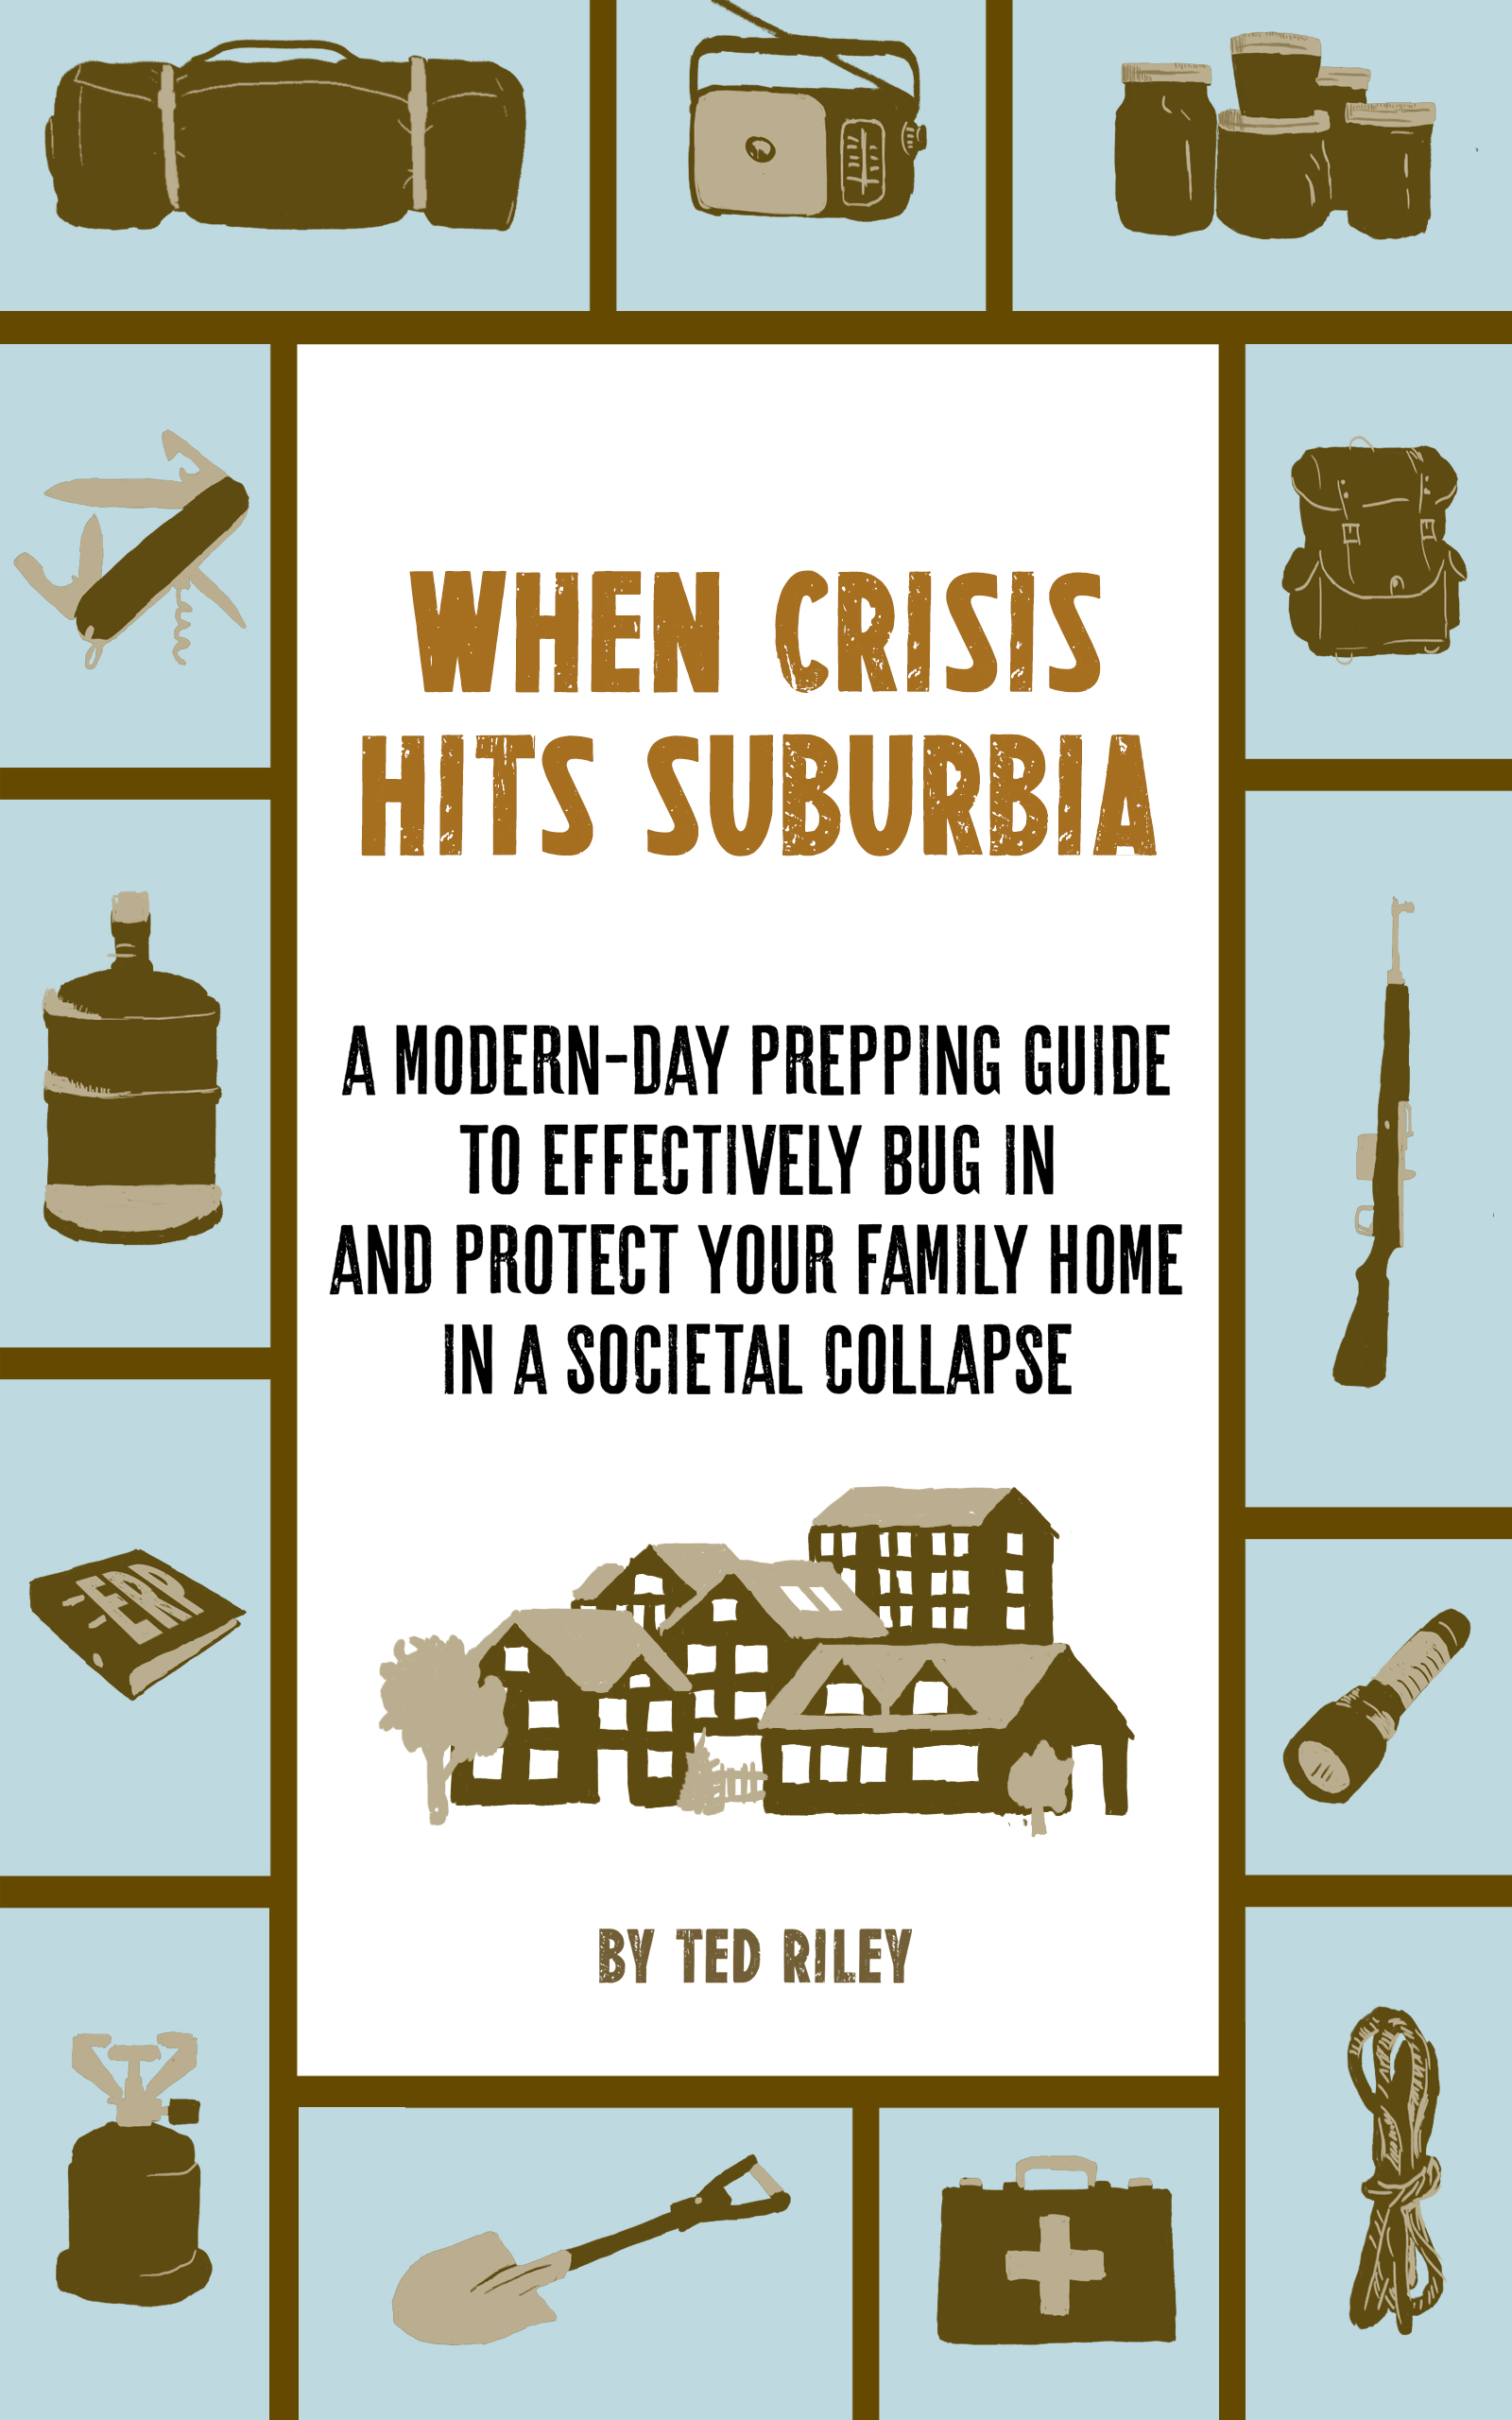 FREE: When Crisis Hits Suburbia by Ted Riley